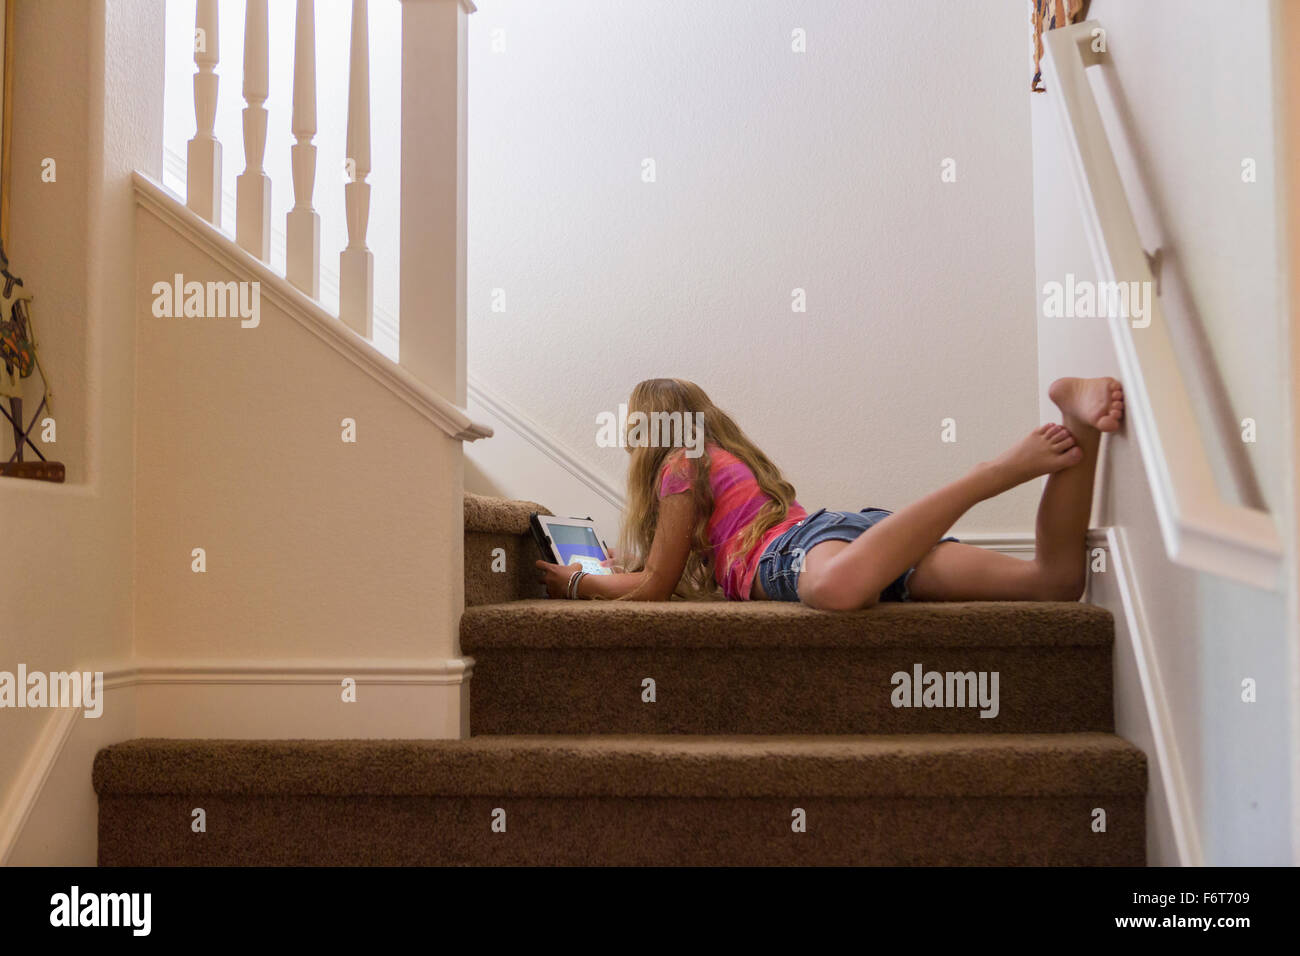 Caucasian girl using digital tablet on stairs Stock Photo